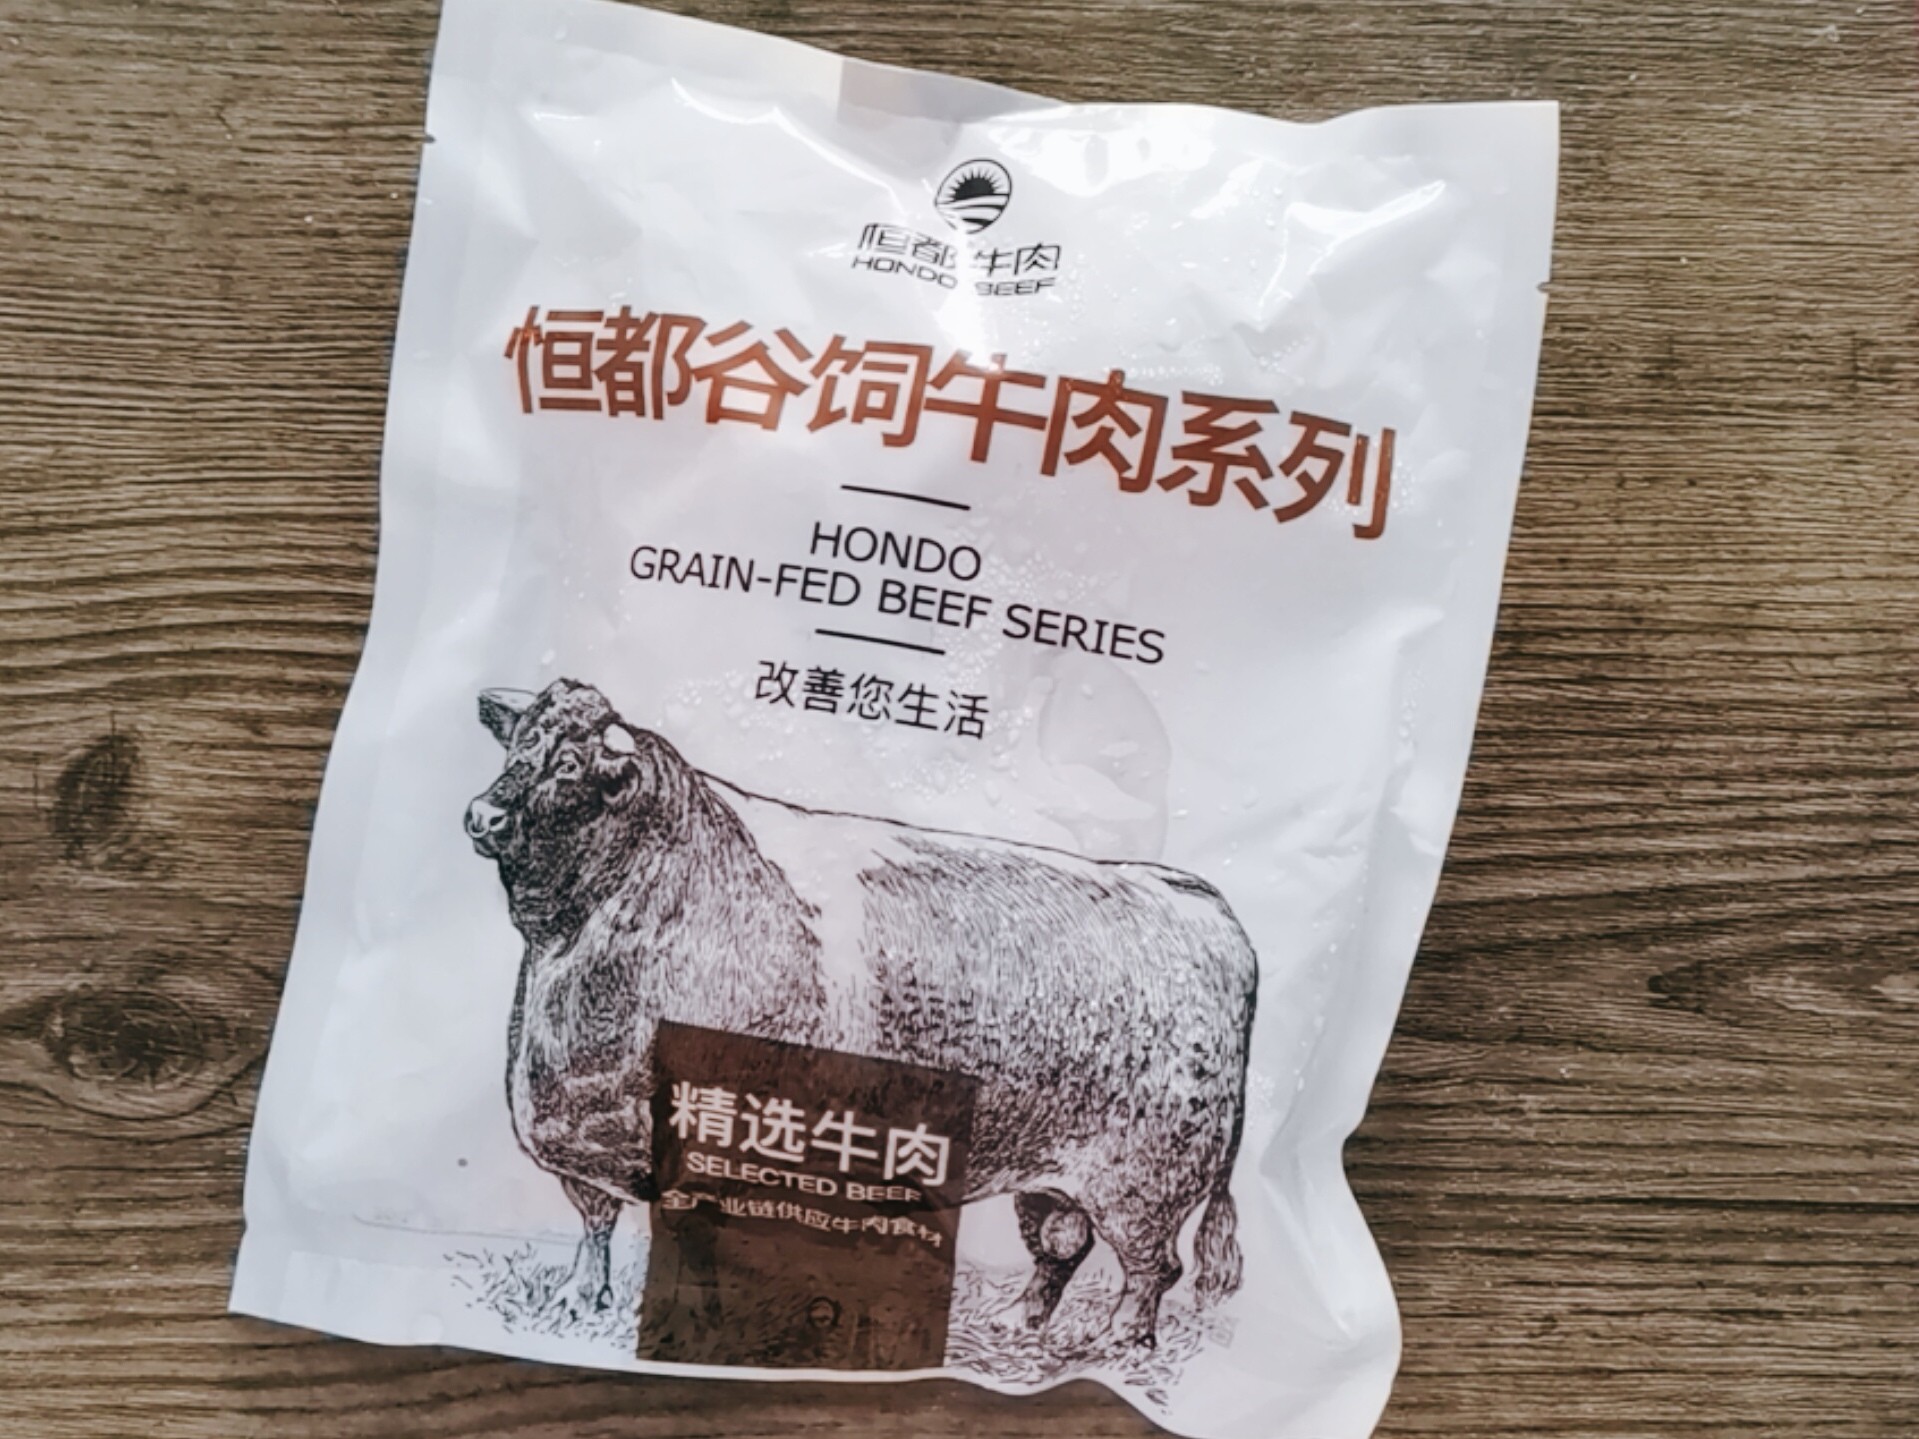 Drinking, Eating Meat, The Beef in Water Margin Sauce is The Official Taste recipe